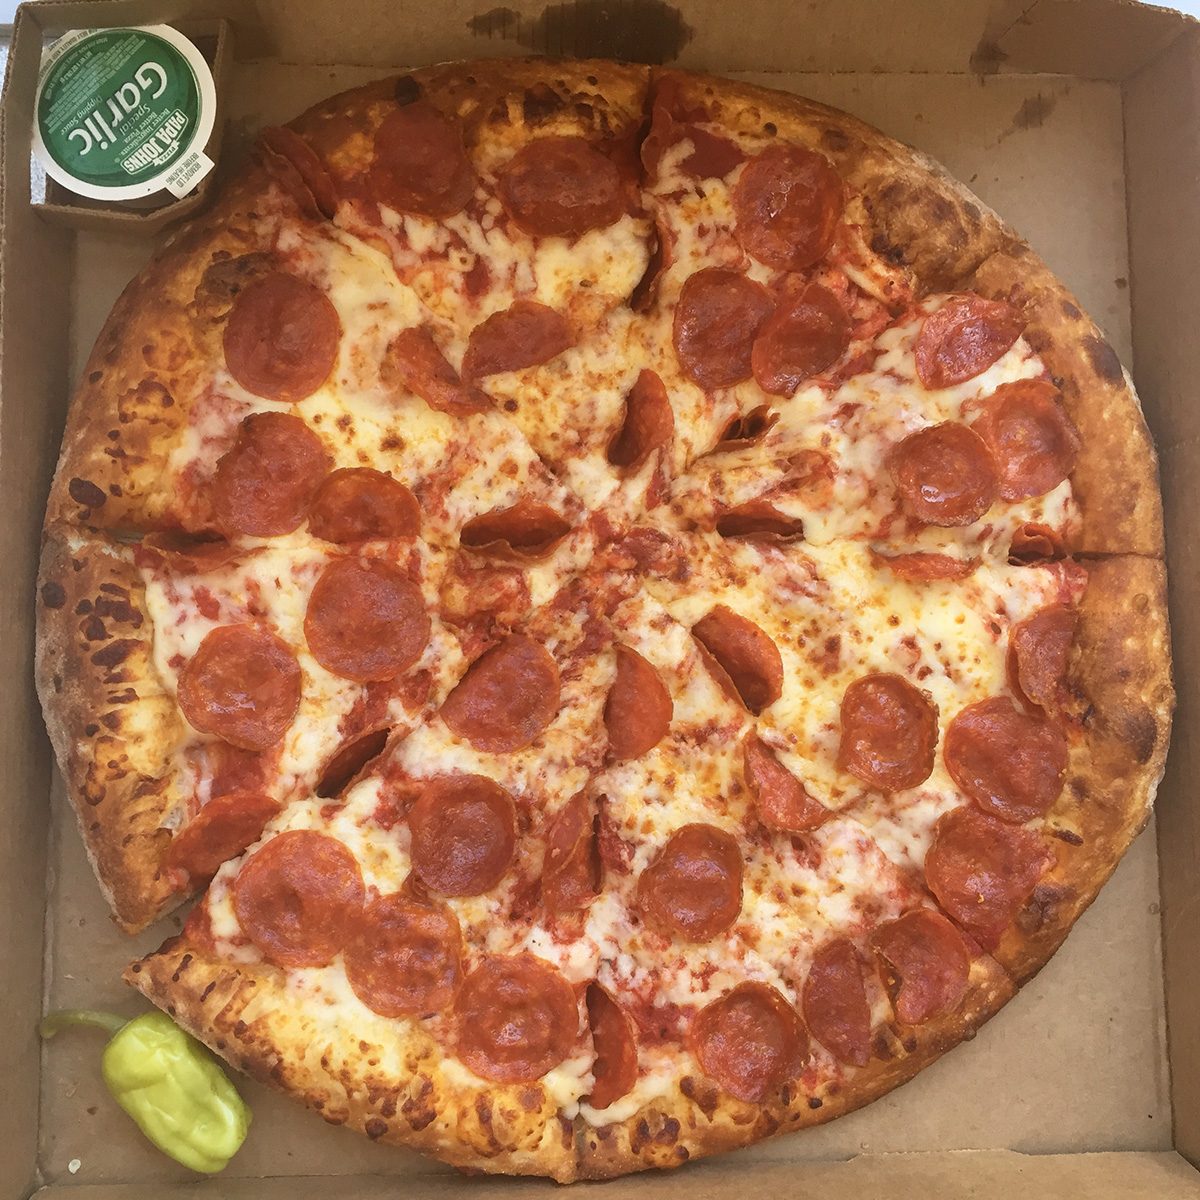 I Tried Pizza From 4 Popular Delivery Pizza Chains—This Is the One I'll  Order Again